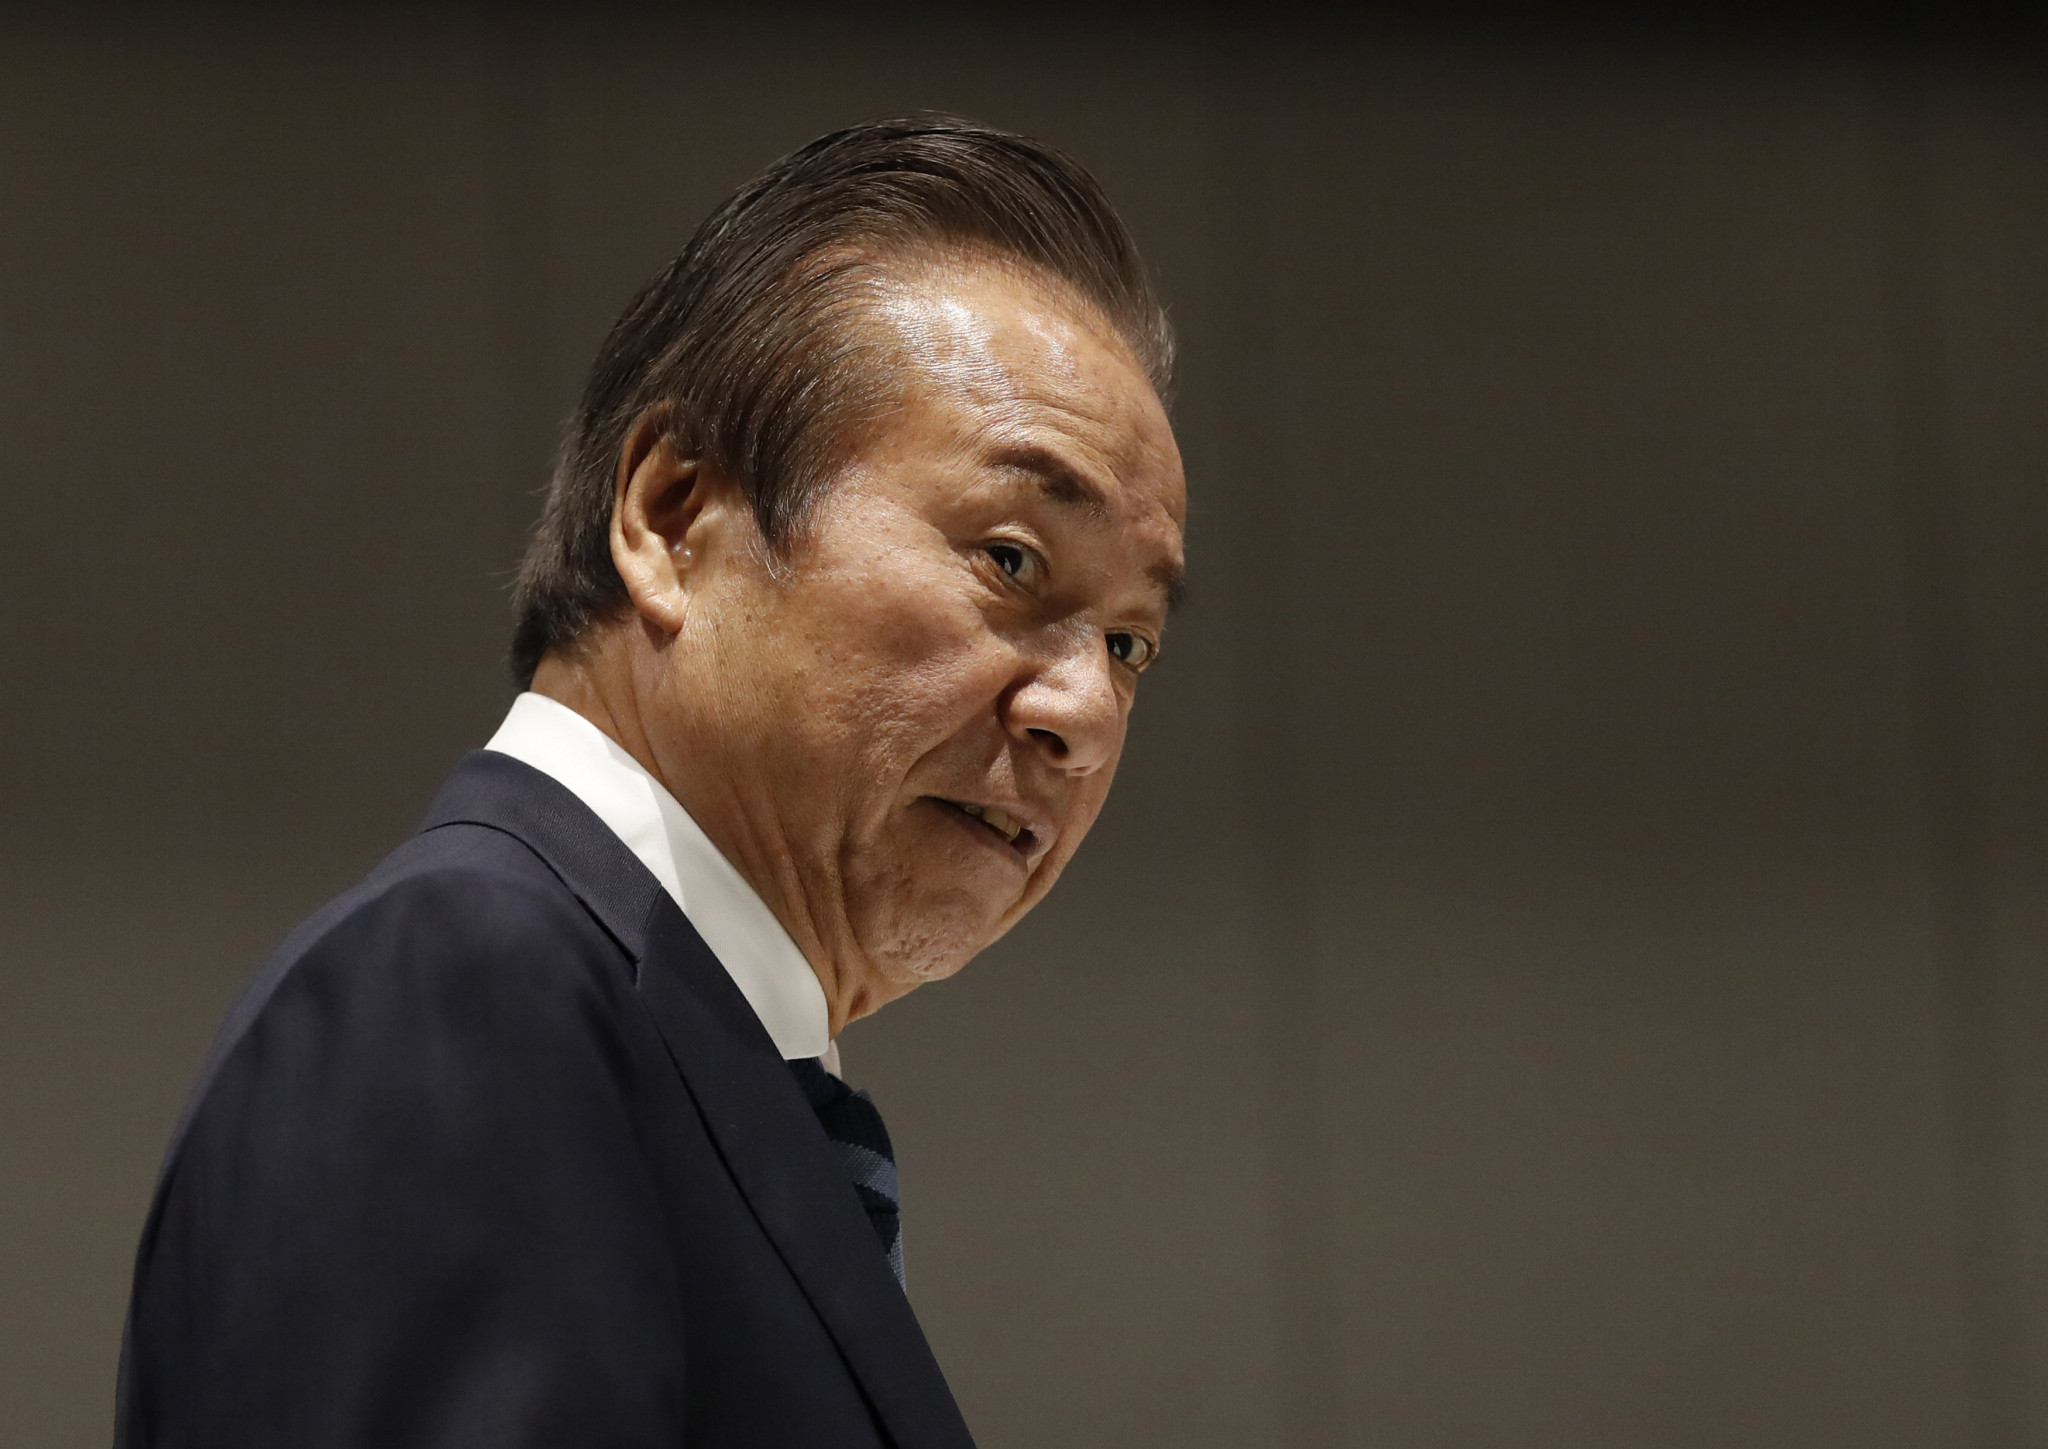 Former Tokyo 2020 Executive Board member Haruyuki Takahashi has been at the centre of a corruption scandal related to last year's Olympic Games ©Getty Images